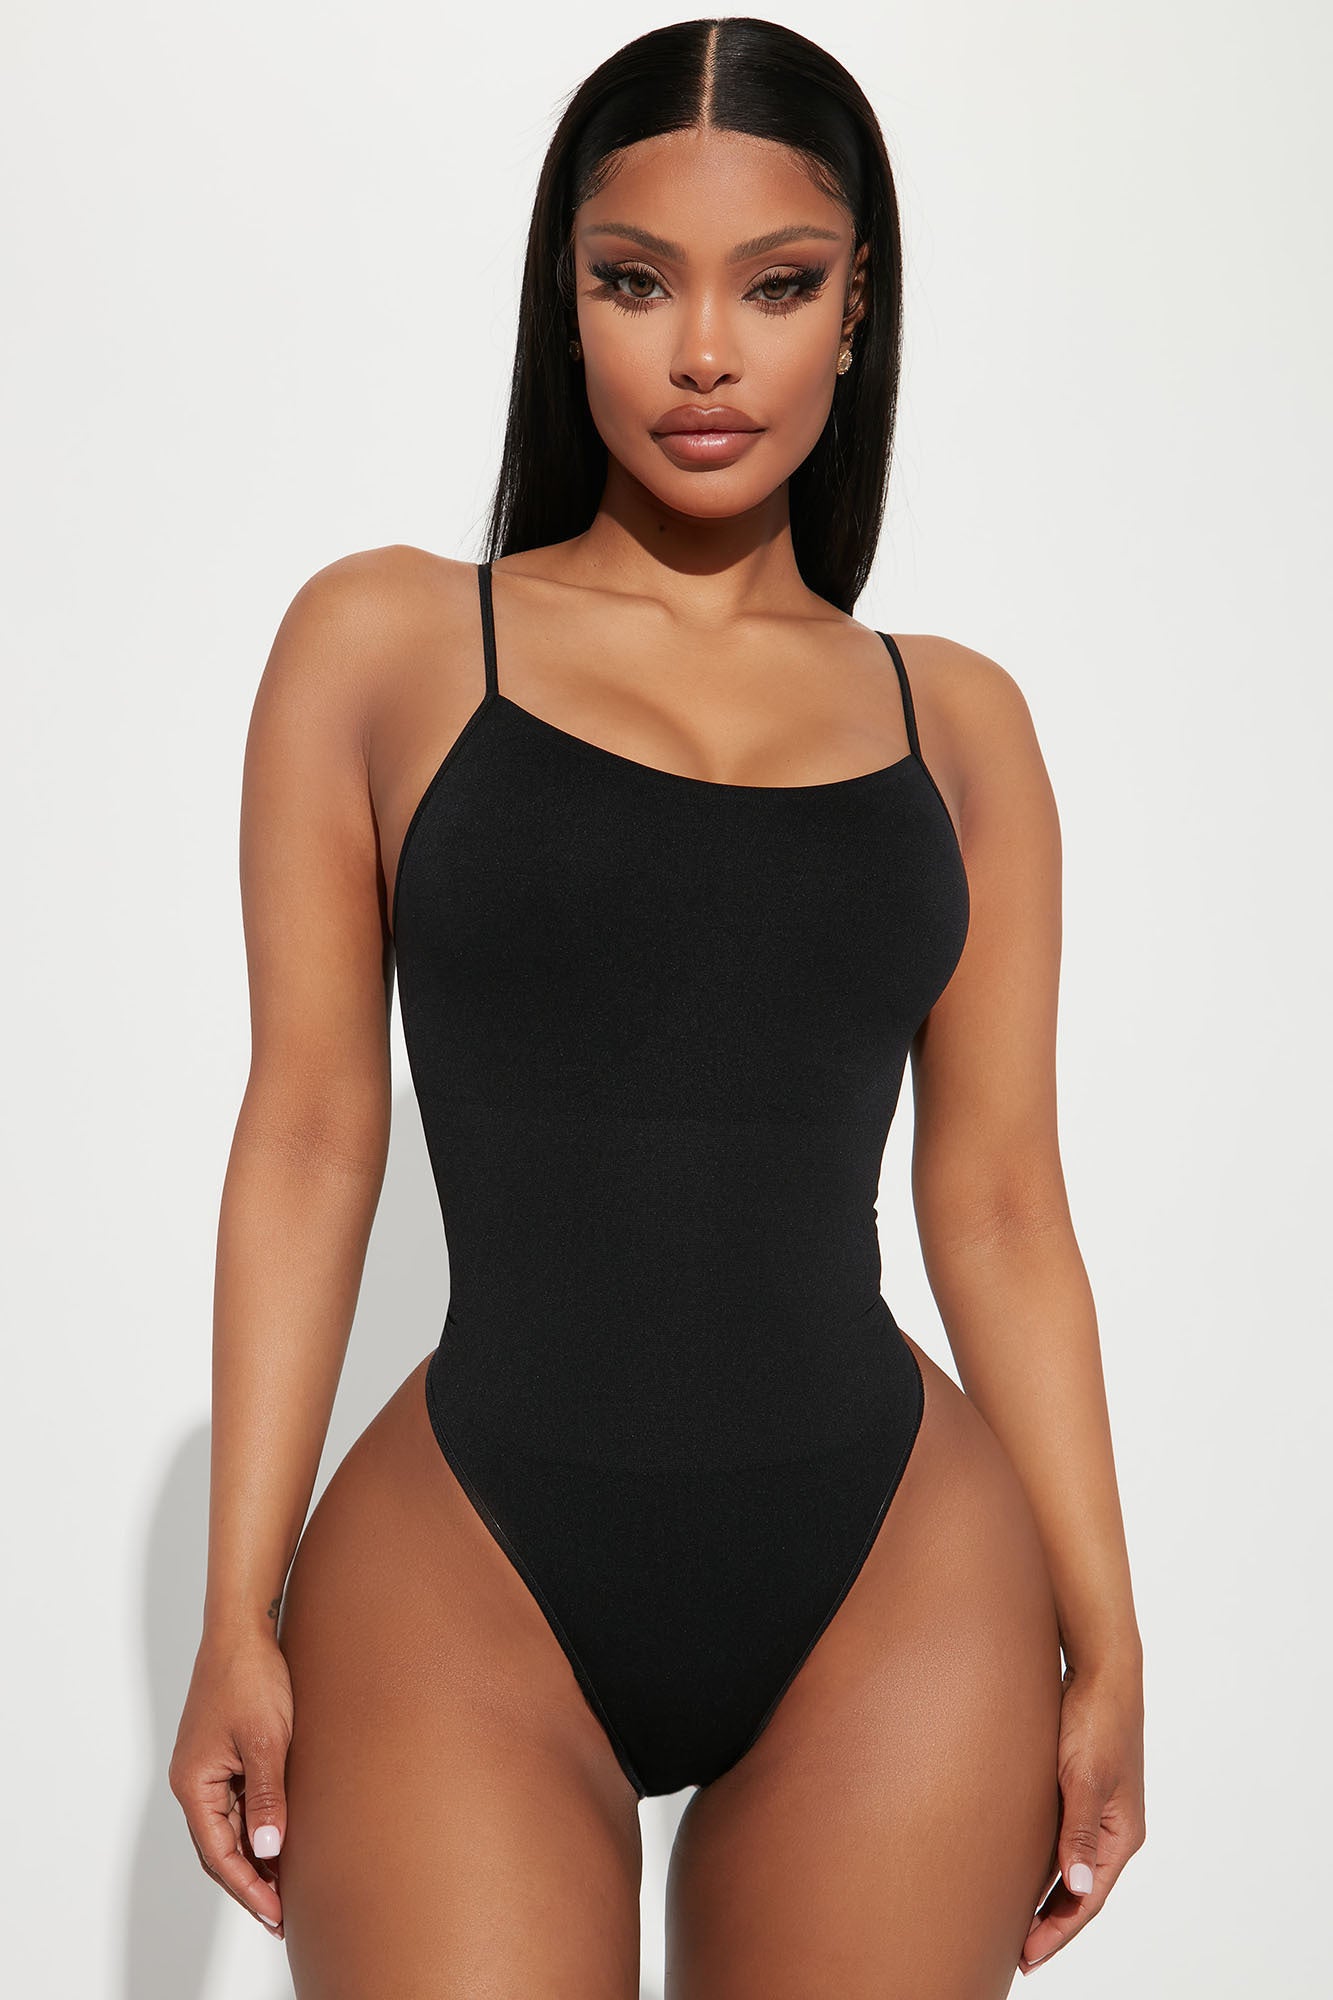 Must-Have sculpting bodysuit In your closet 💗🎀 30% OFF ⏰Nov.17th - 27th  🔥Black Friday & Cyber Monday Model's size：S/M ➡ SHOP Here: ht…